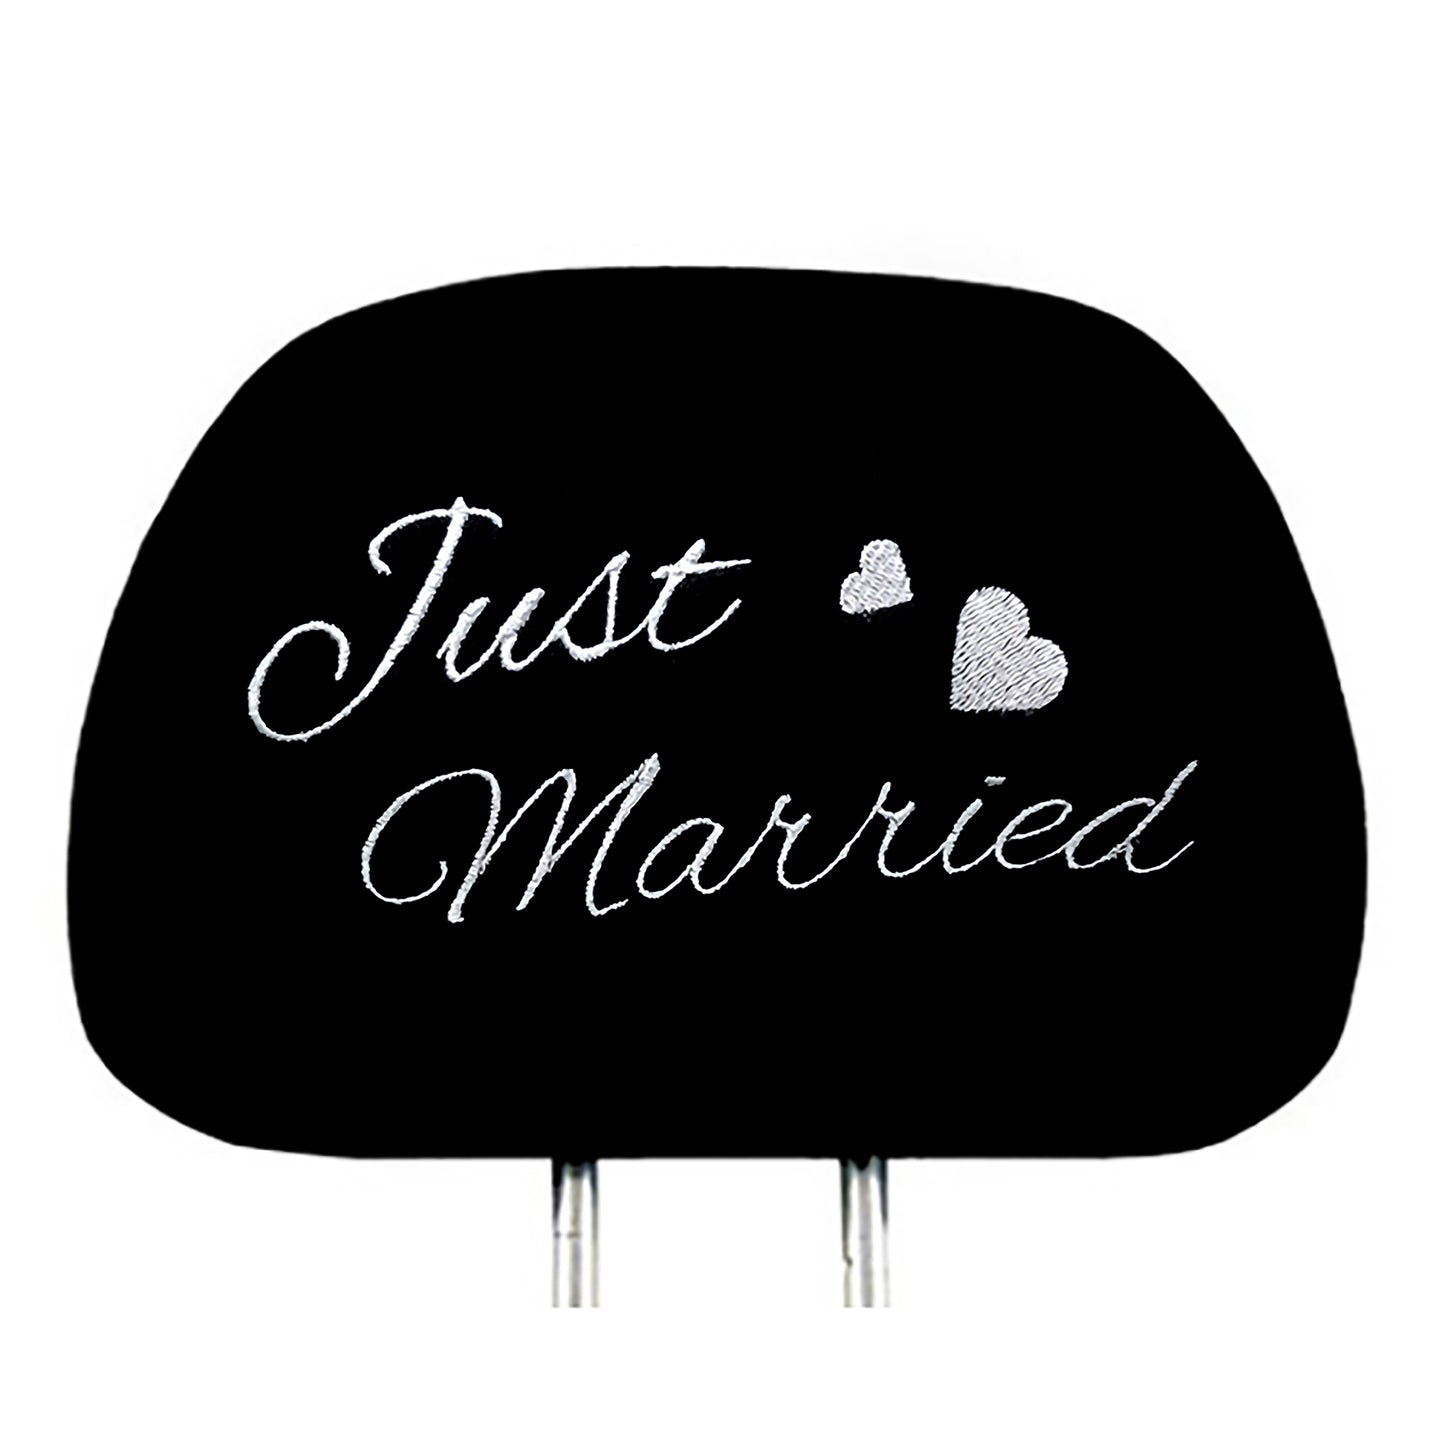 Just Married Design Auto Truck SUV Car Seat Headrest Cover Accessory Pair - Yupbizauto